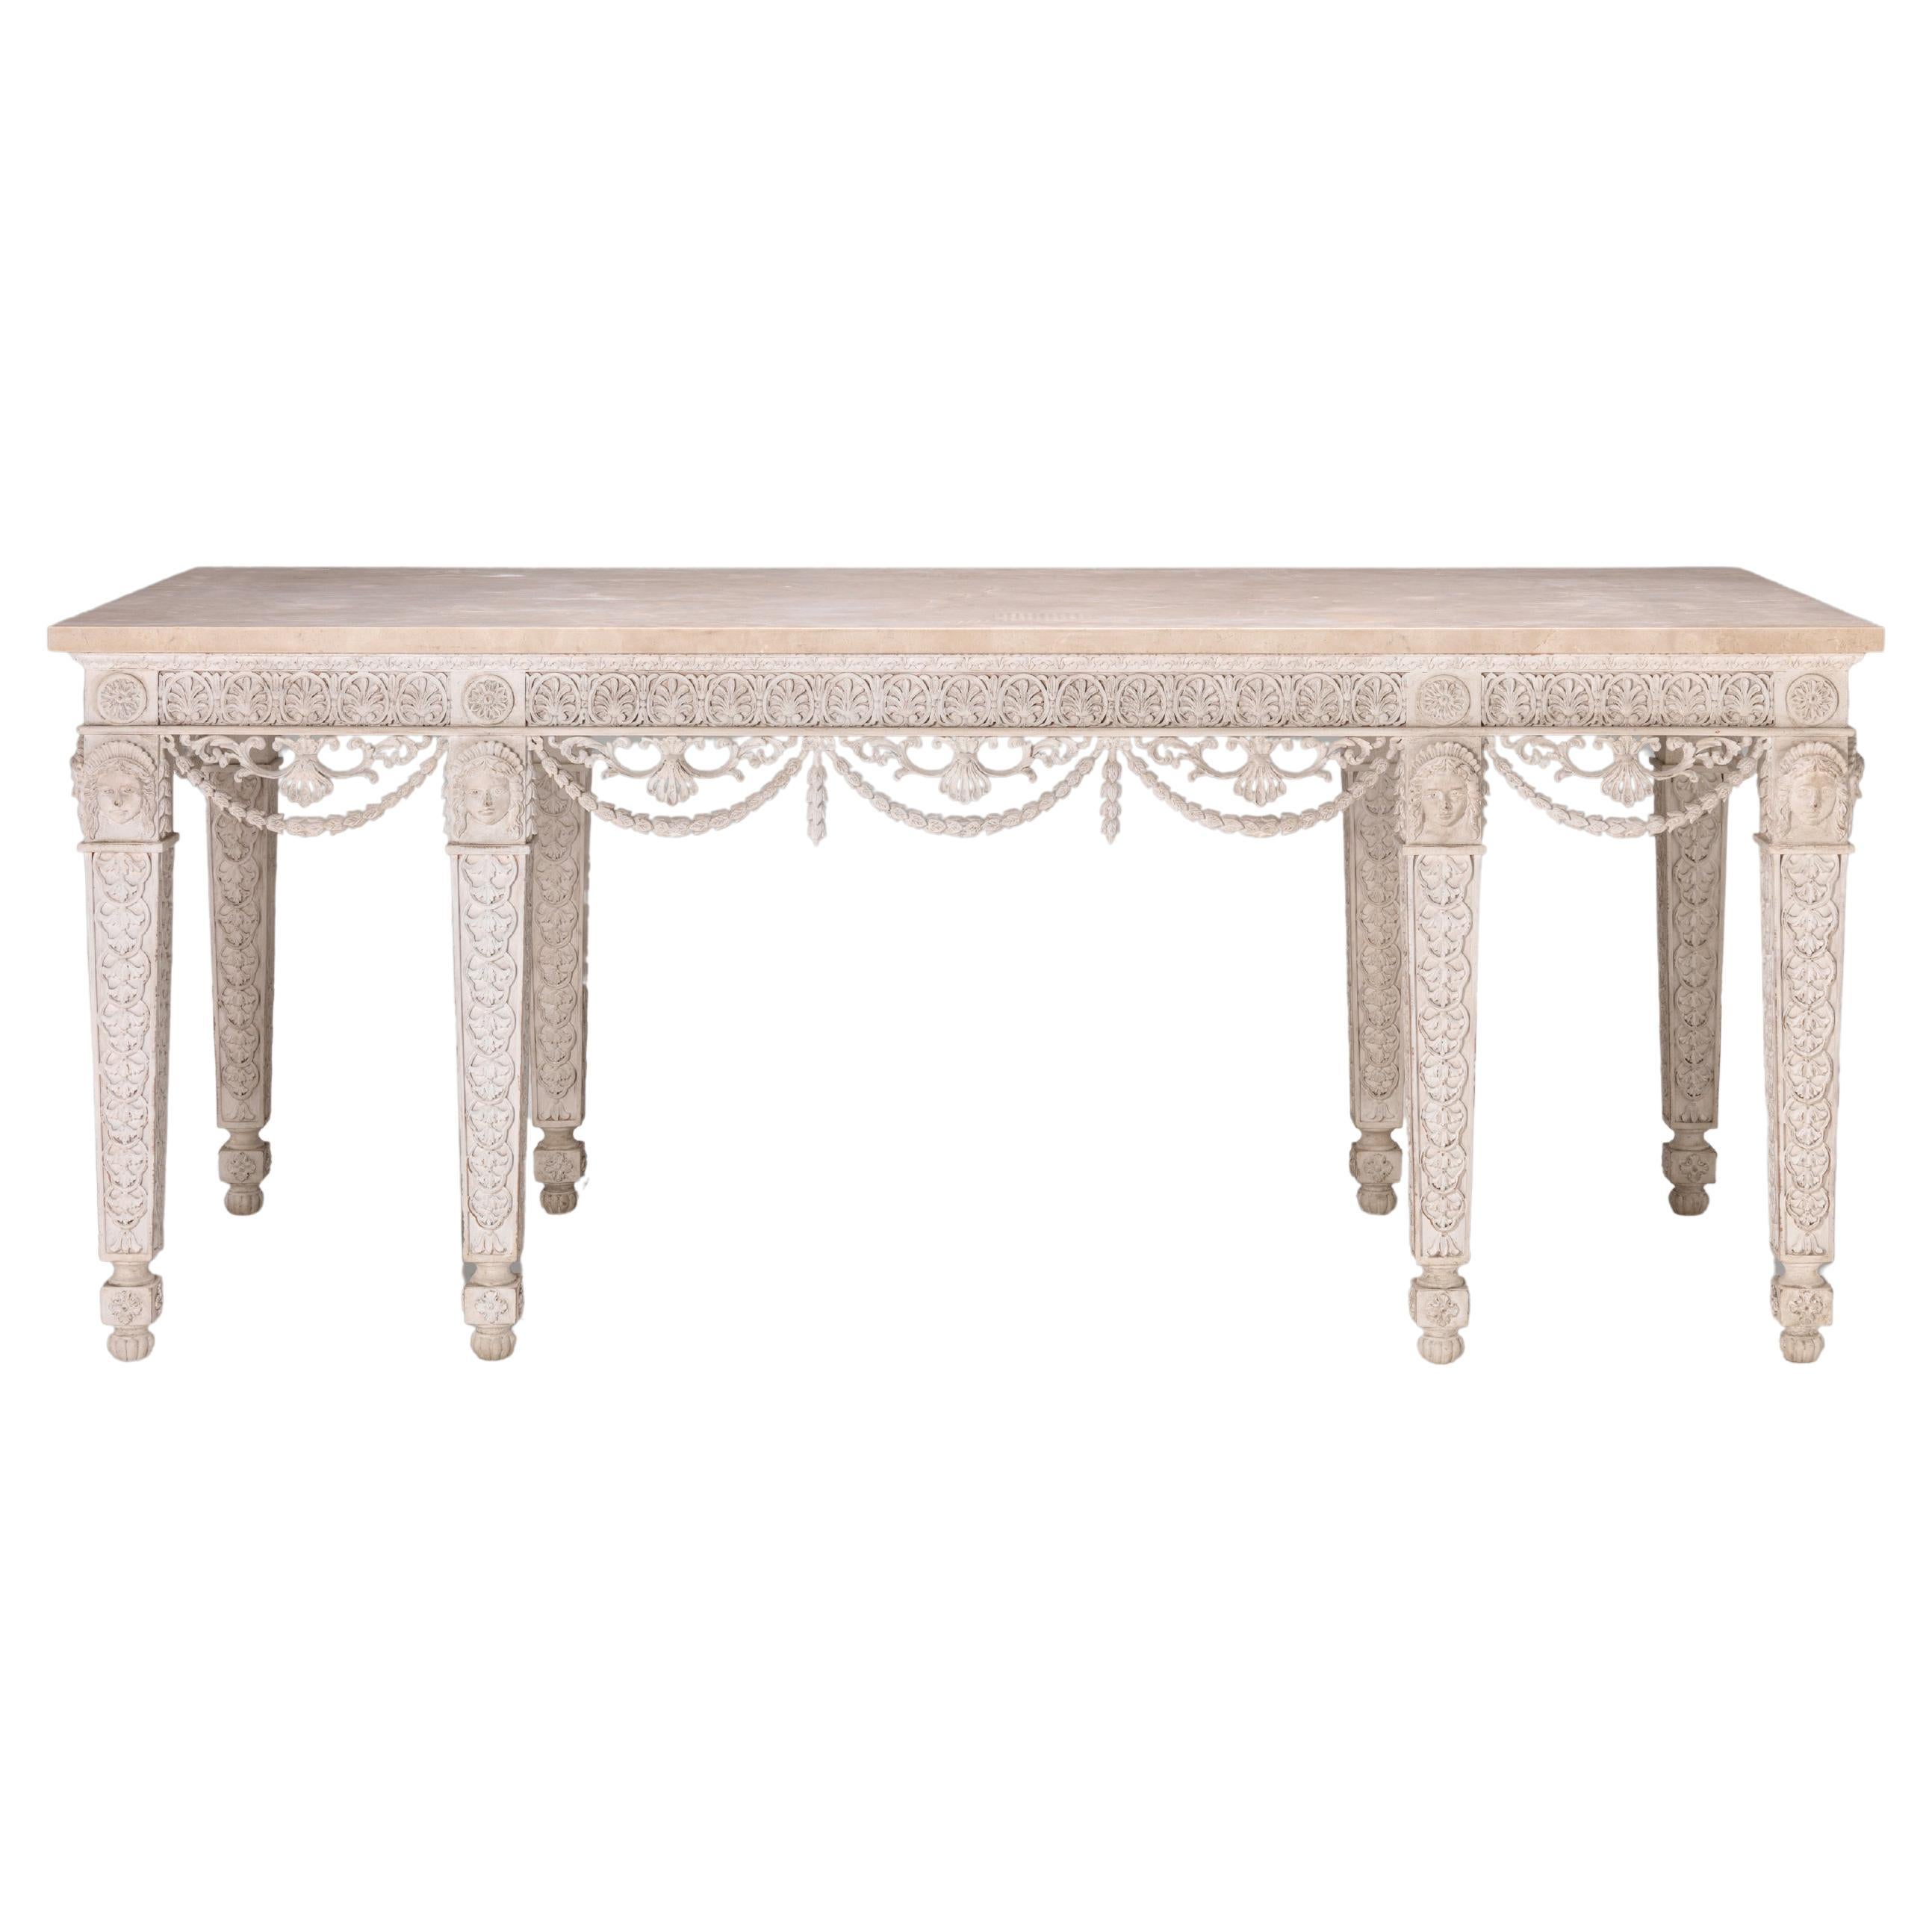 The Croome Court Console Table